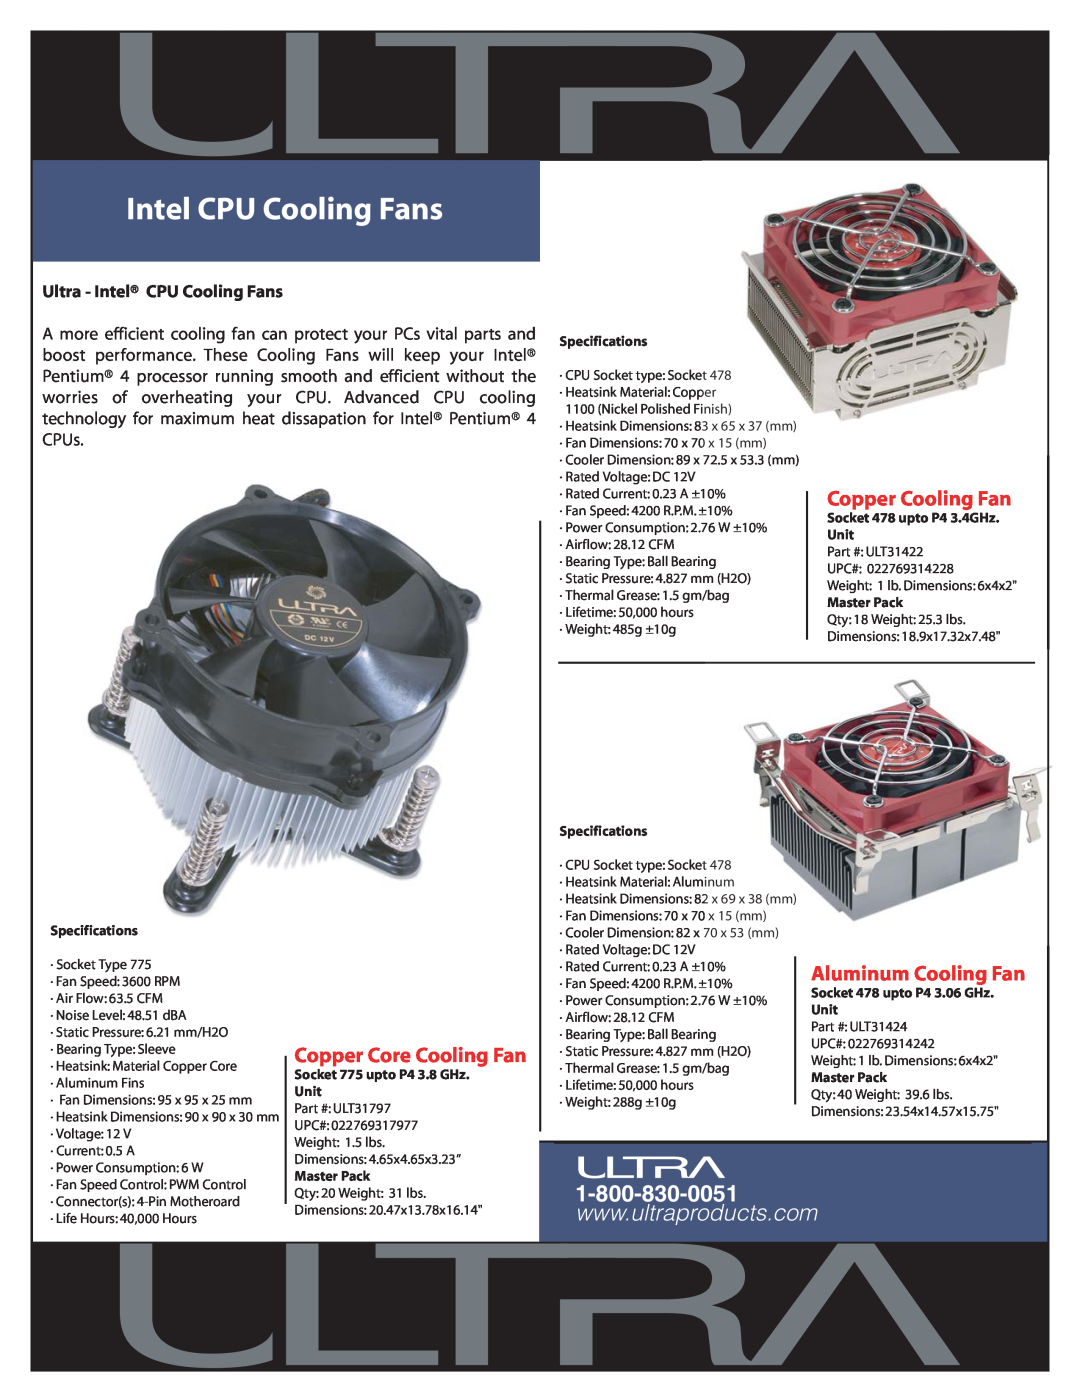 Ultra Products ULT31422 dimensions Intel CPU Cooling Fans, Copper Cooling Fan, Copper Core Cooling Fan, Specifications 